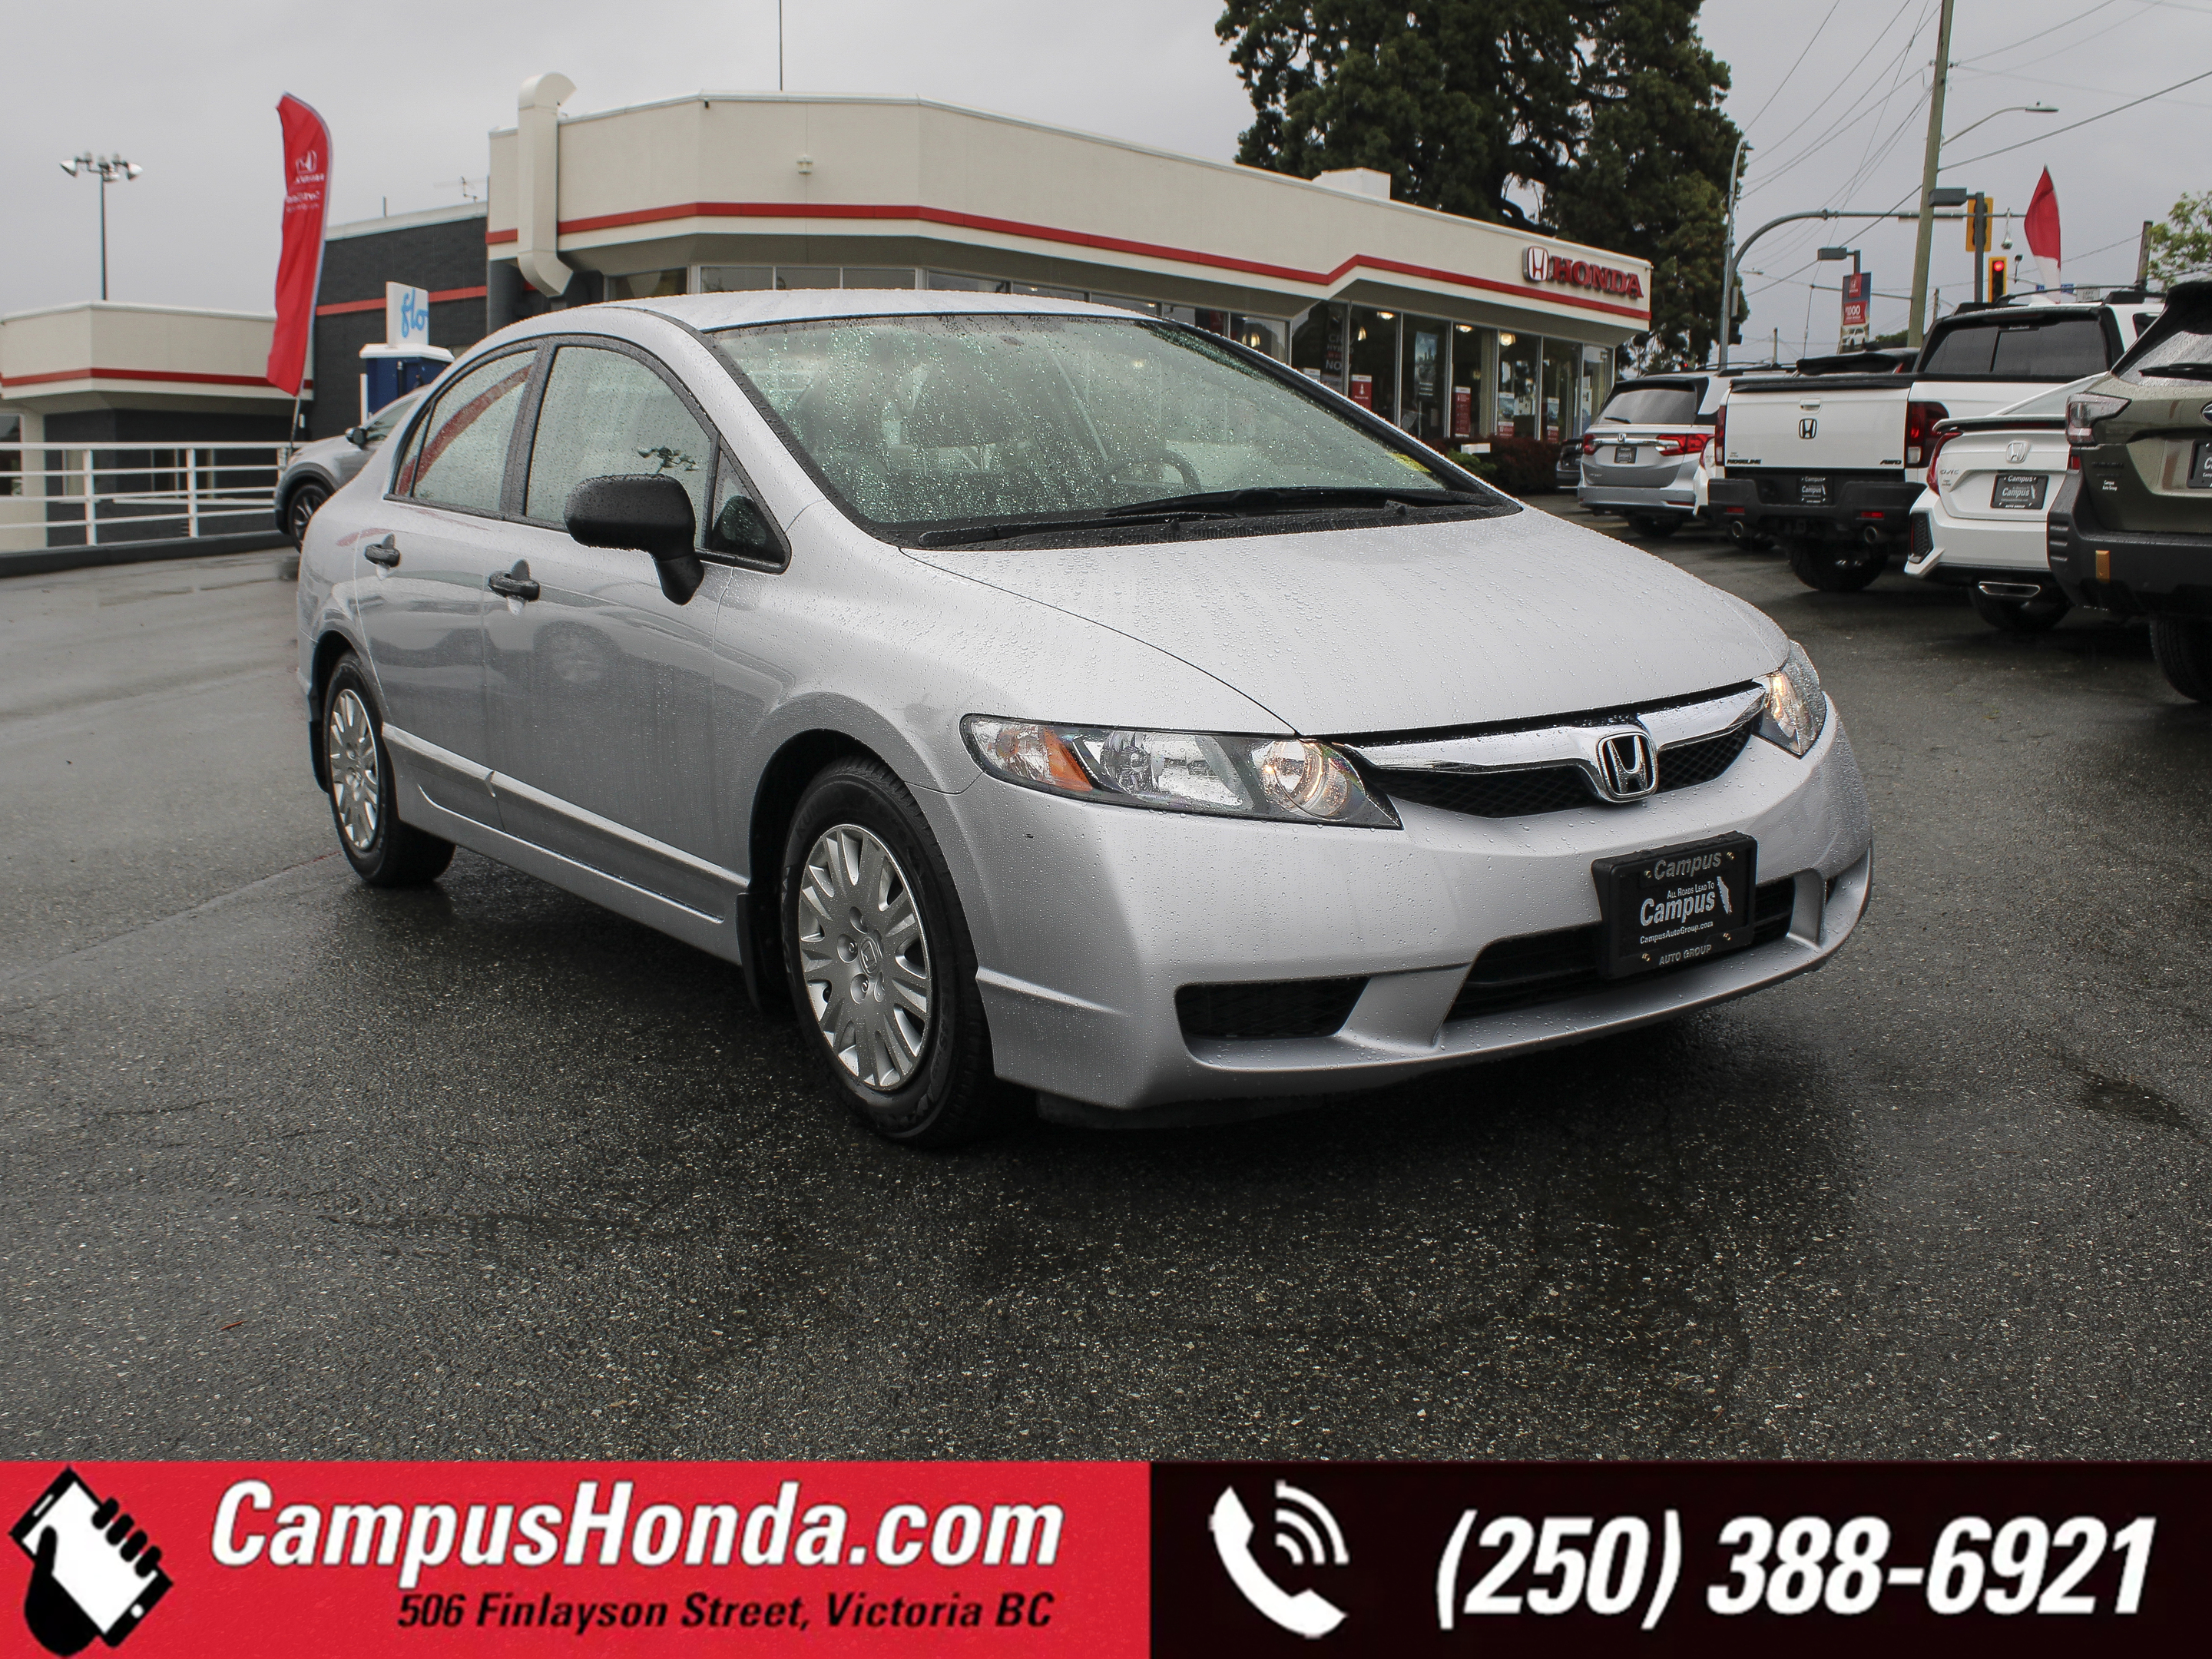 2009 Honda Civic DX-A Manual | One Local Owner | Campus Serviced |